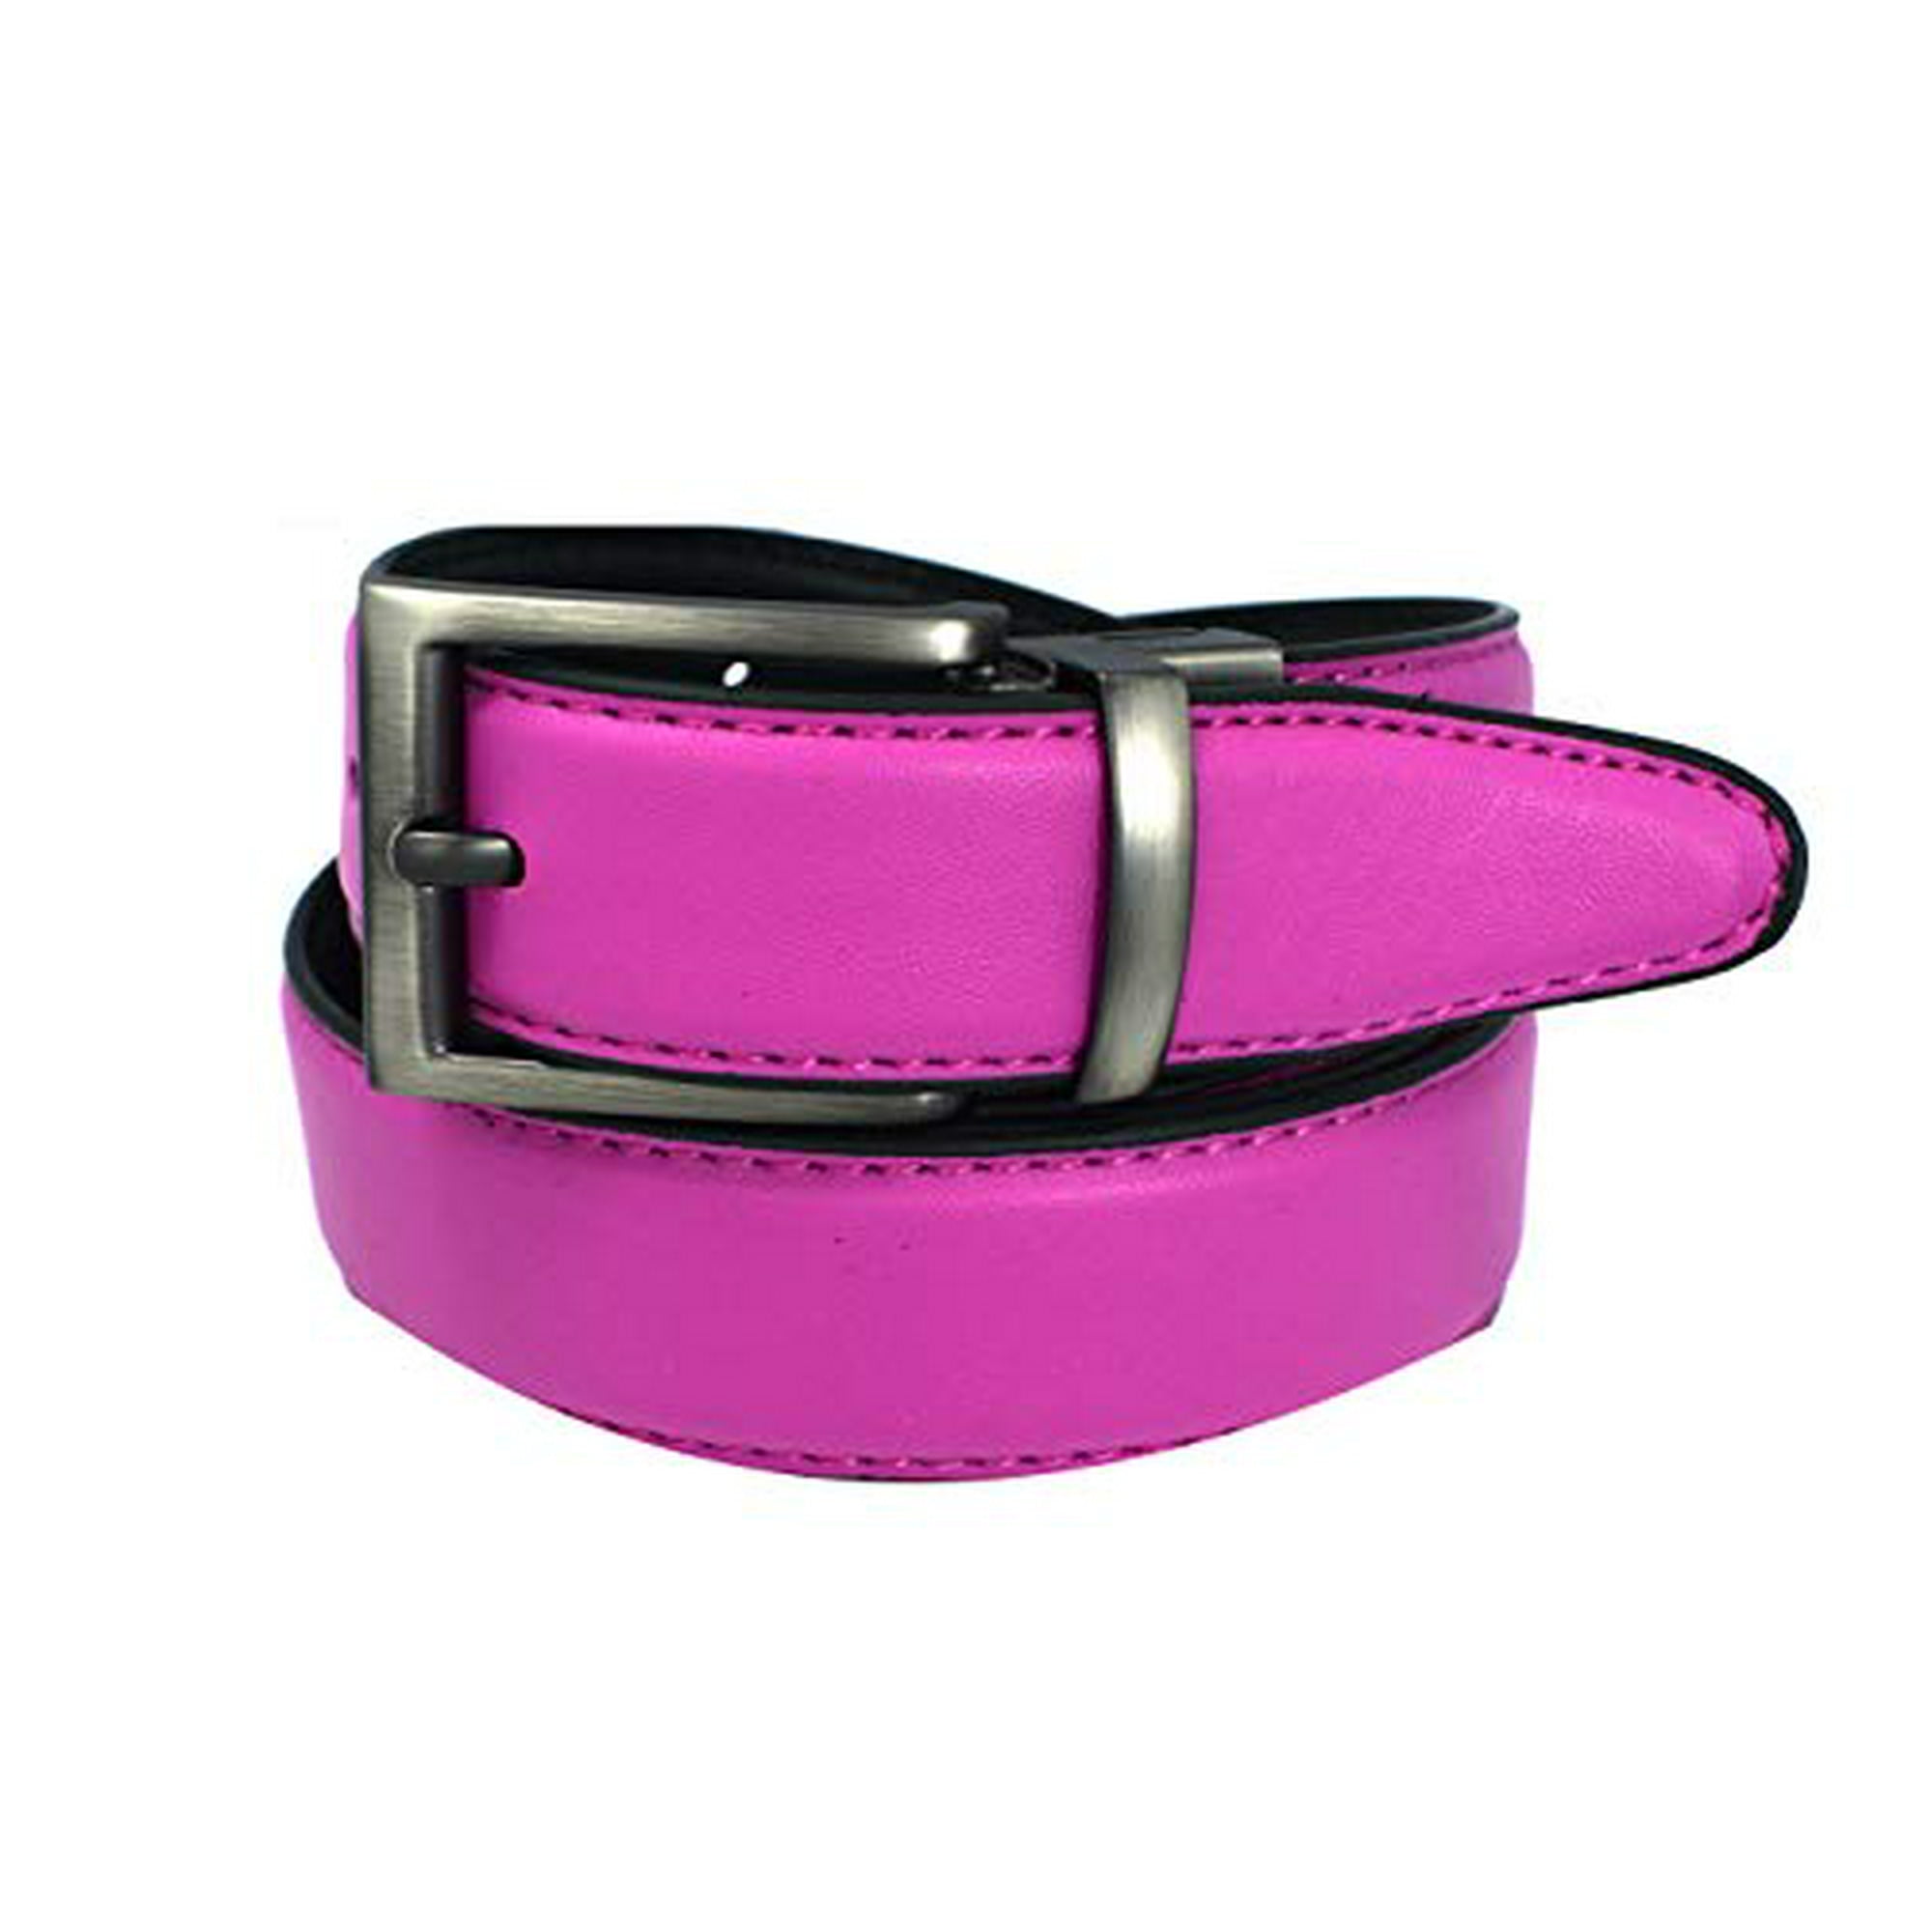 Reversible Belt Bonded Leather Removable Silver-Tone Buckle Cream / Black